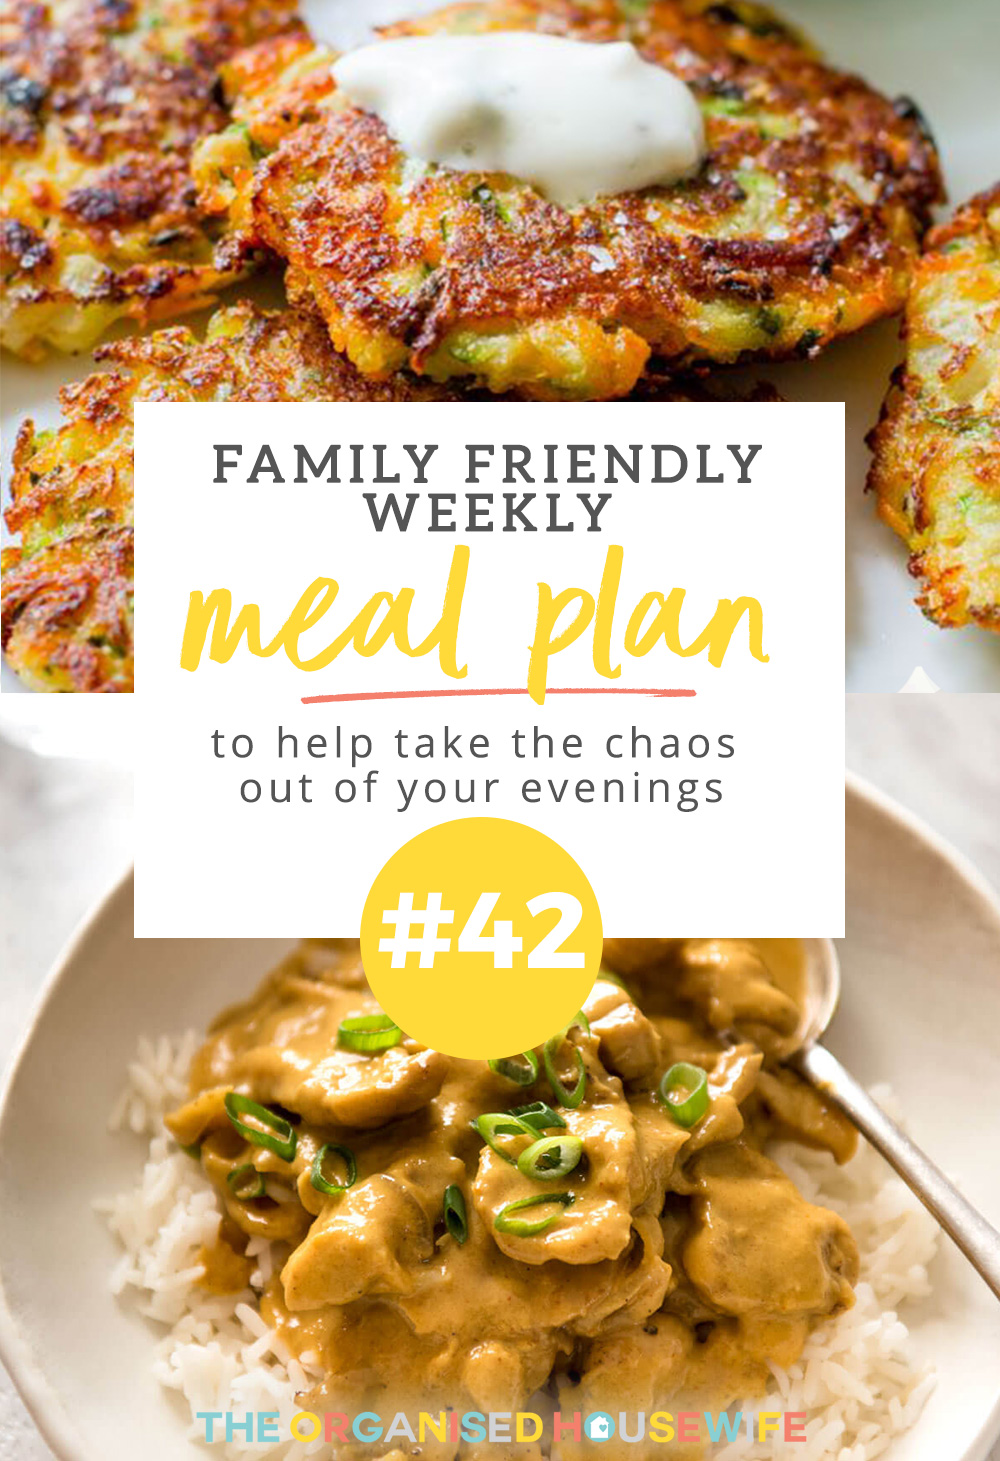 This weekly family meal plan includes many different cuisines done in a simple way that isn't too overwhelming for weeknight dinners